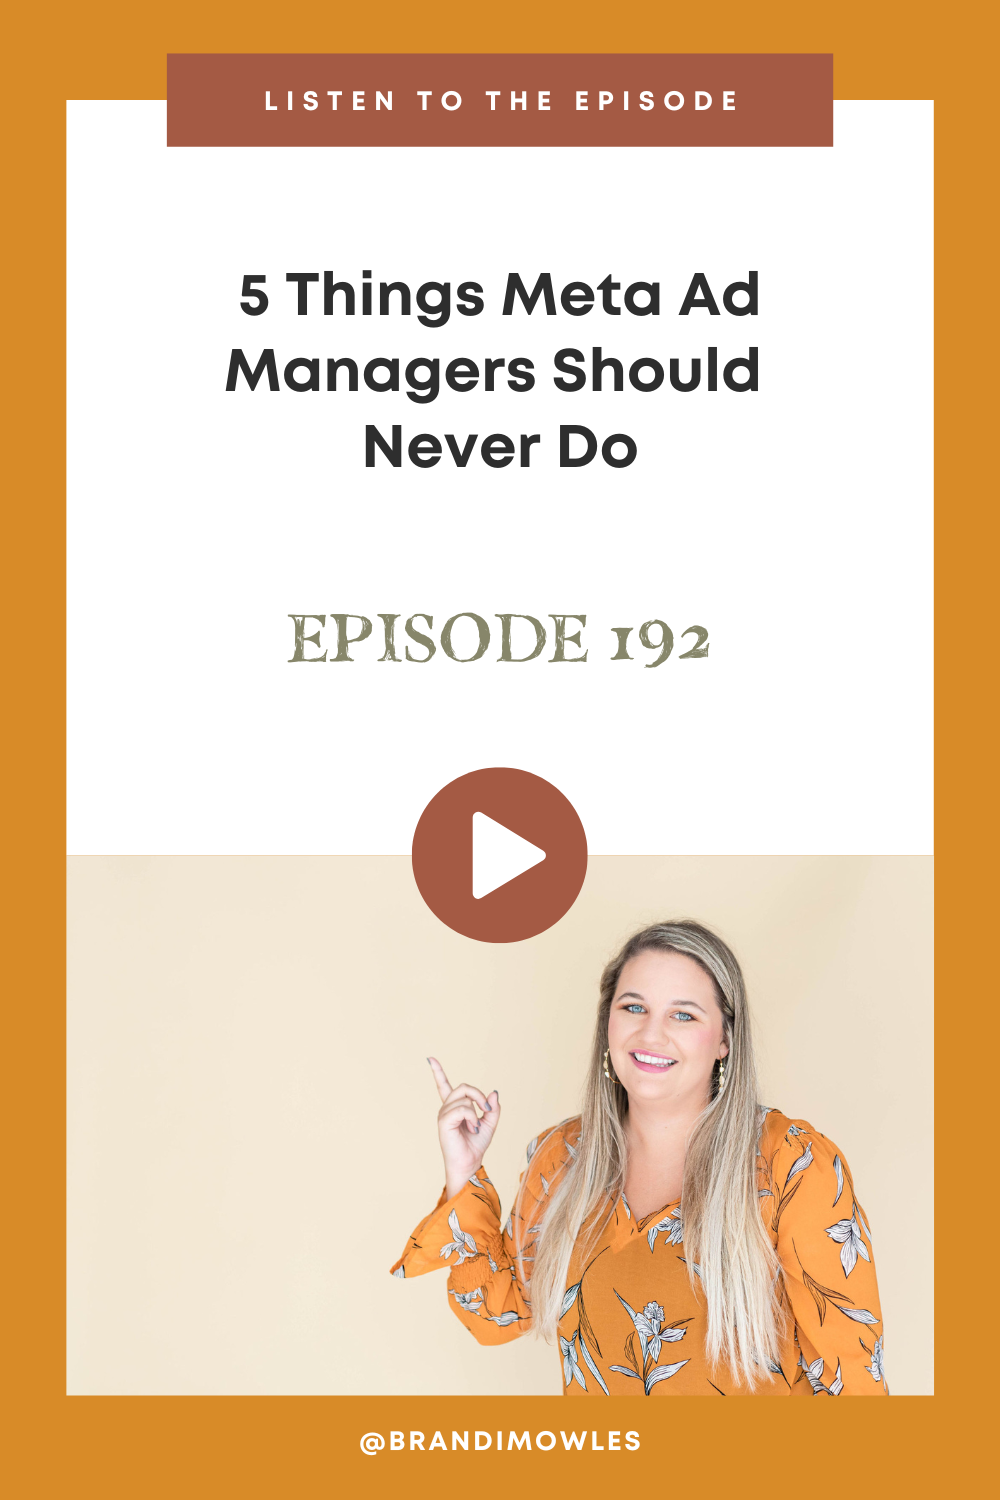 Brandi Mowles podcast episode feature about what ad managers should never do